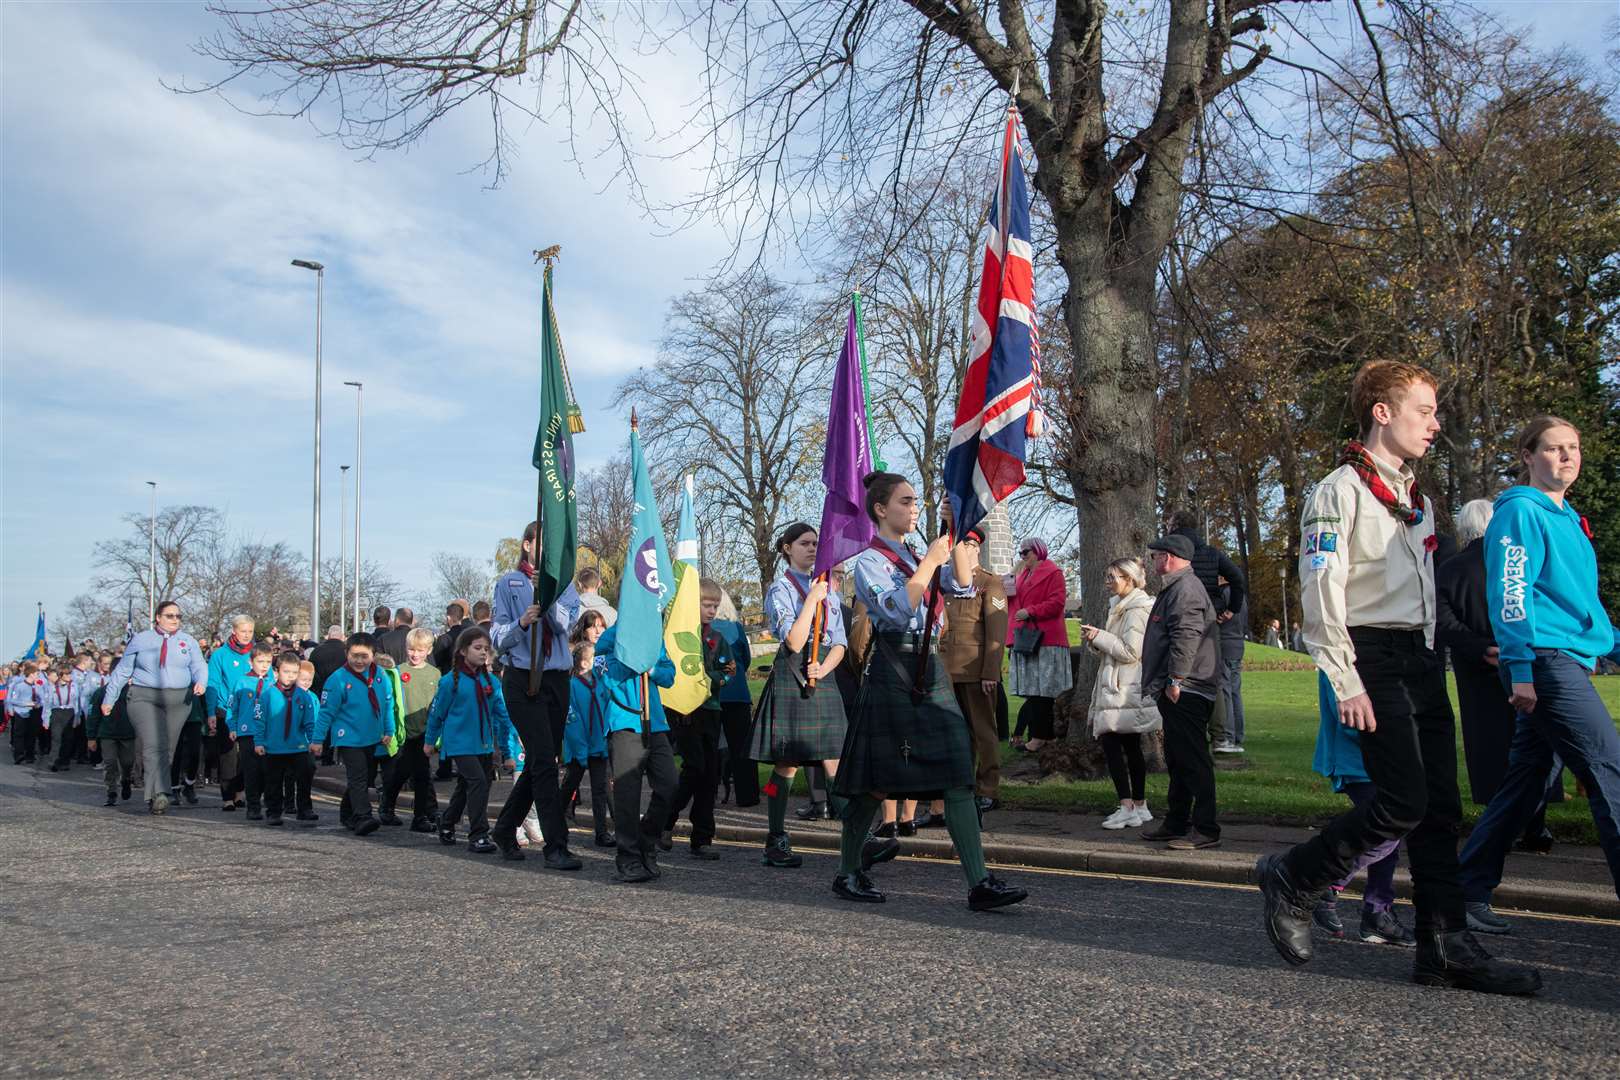 Representatives of local children's and youth groups on their way to the wreath laying. Picture: Daniel Forsyth